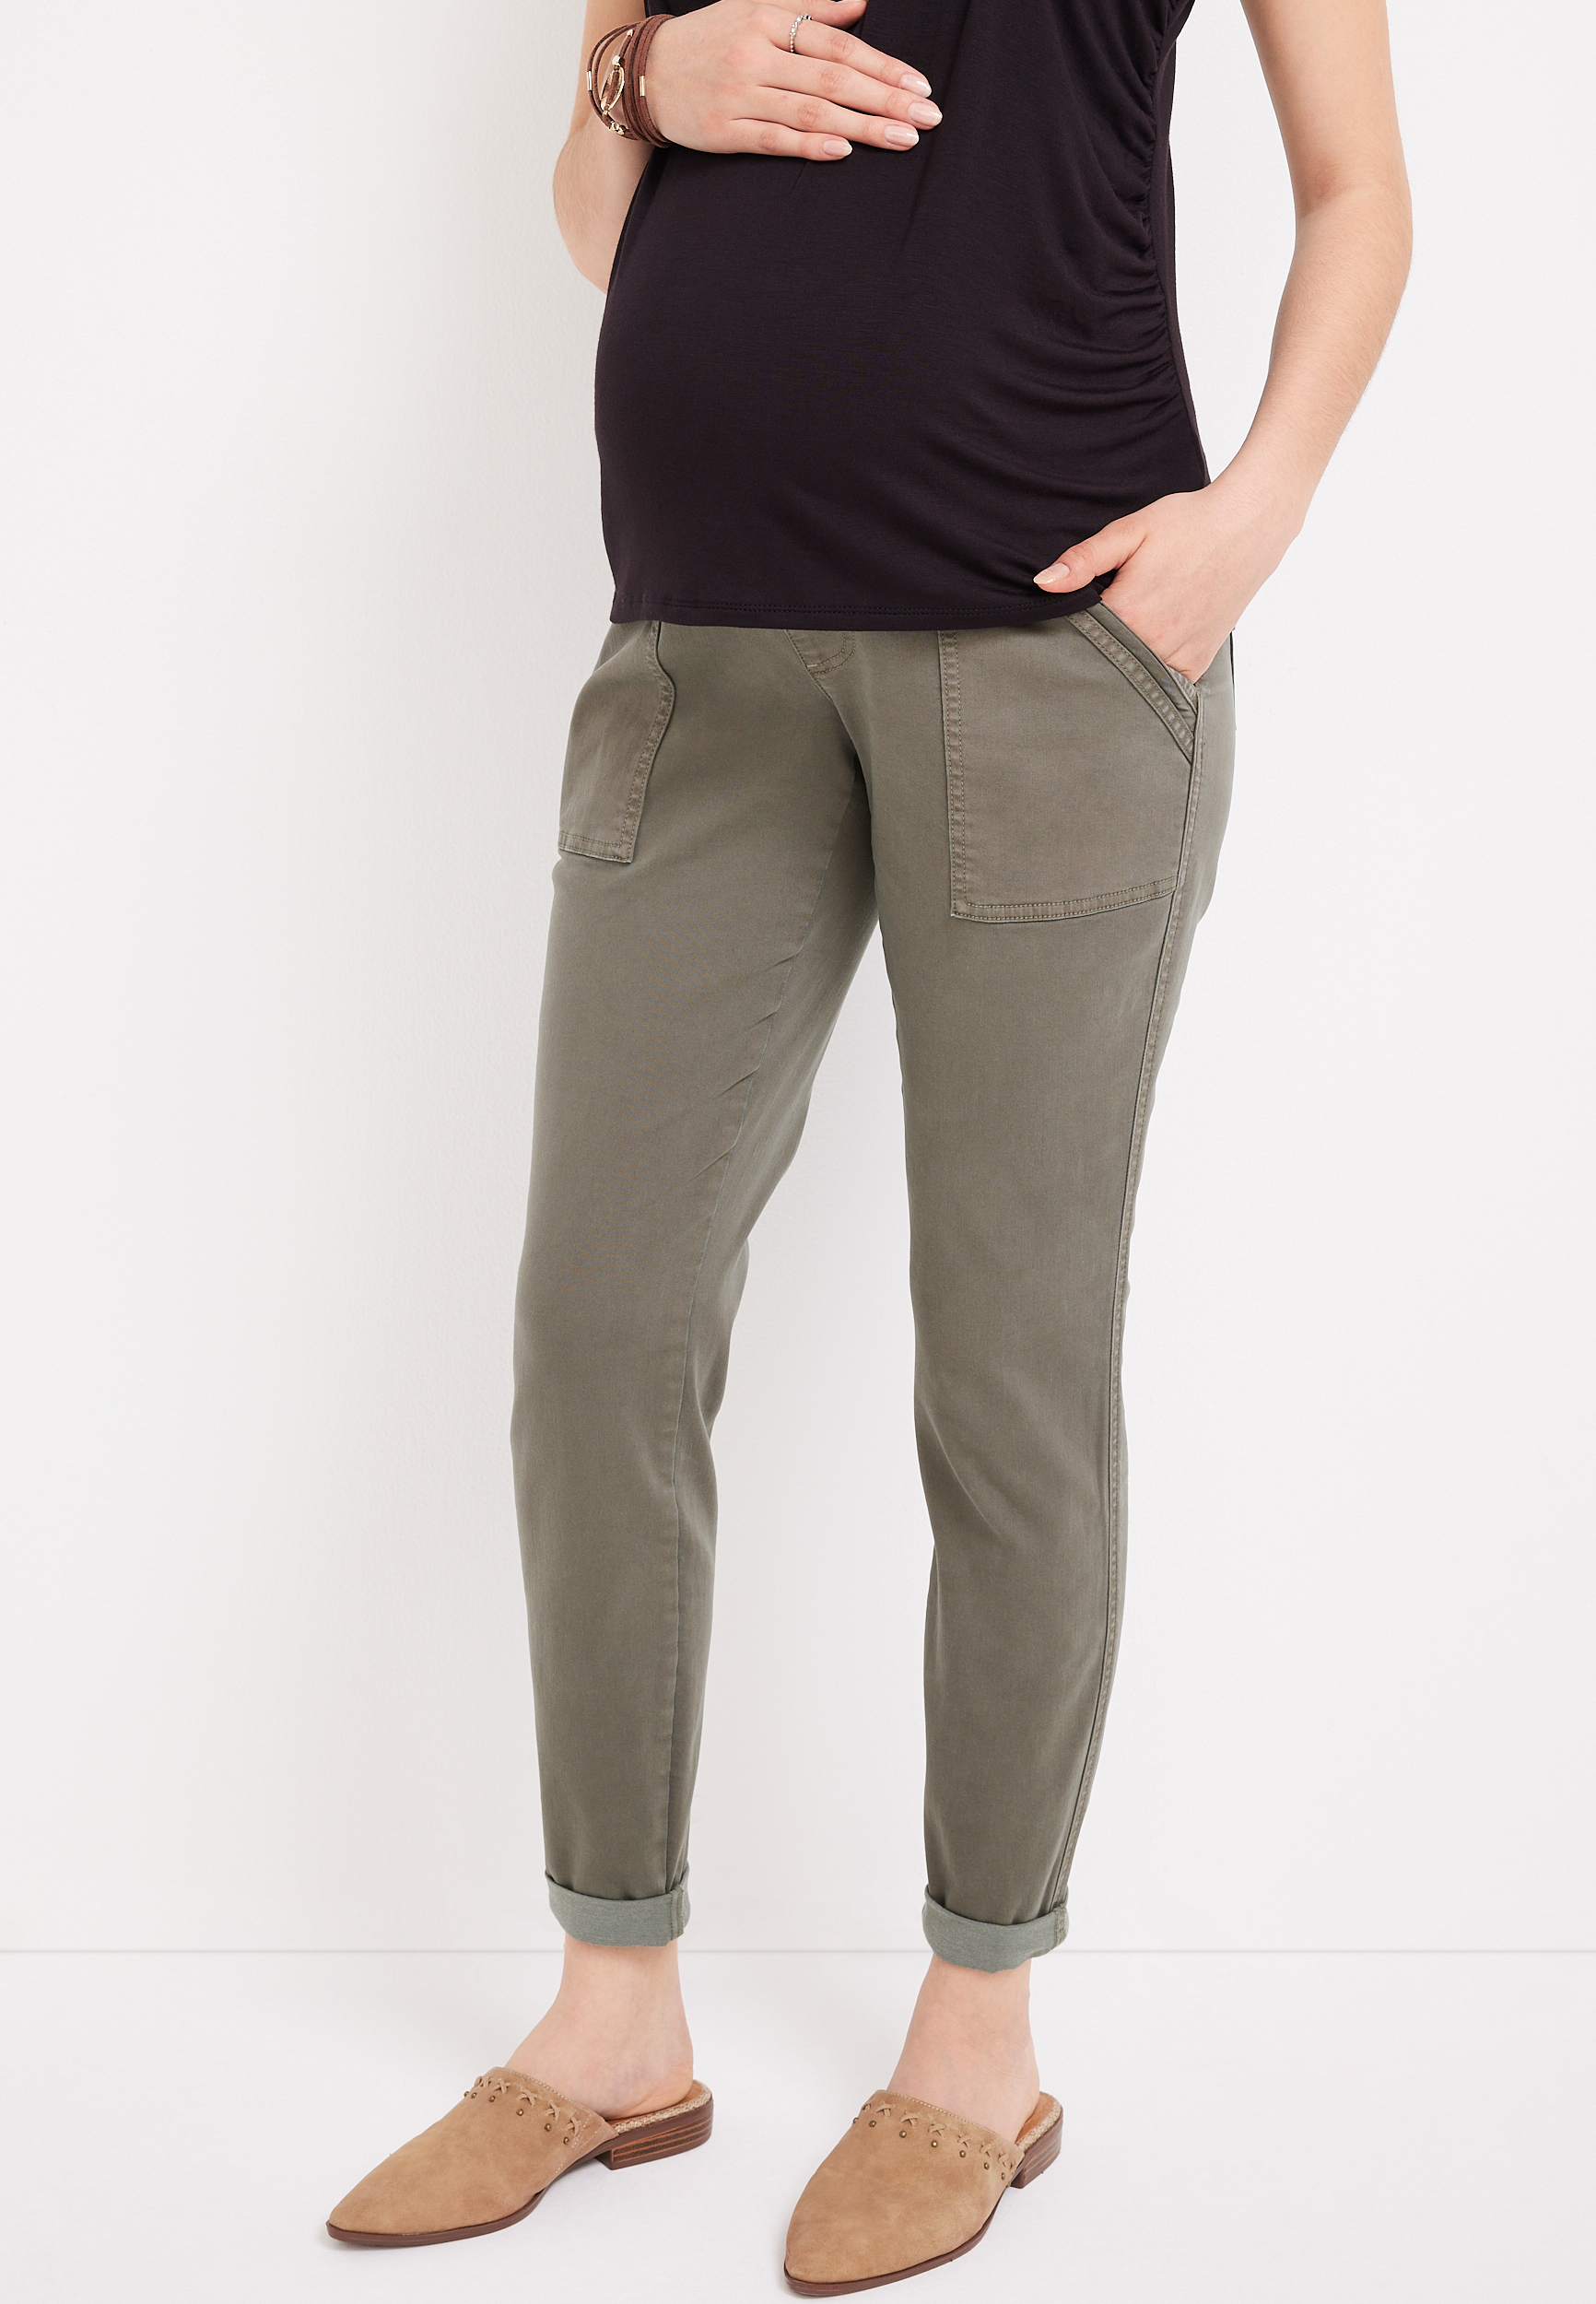 s 'soft and comfy' £24 tummy control Summer trousers go with almost  any top and 'hide all of my bumps' - Manchester Evening News